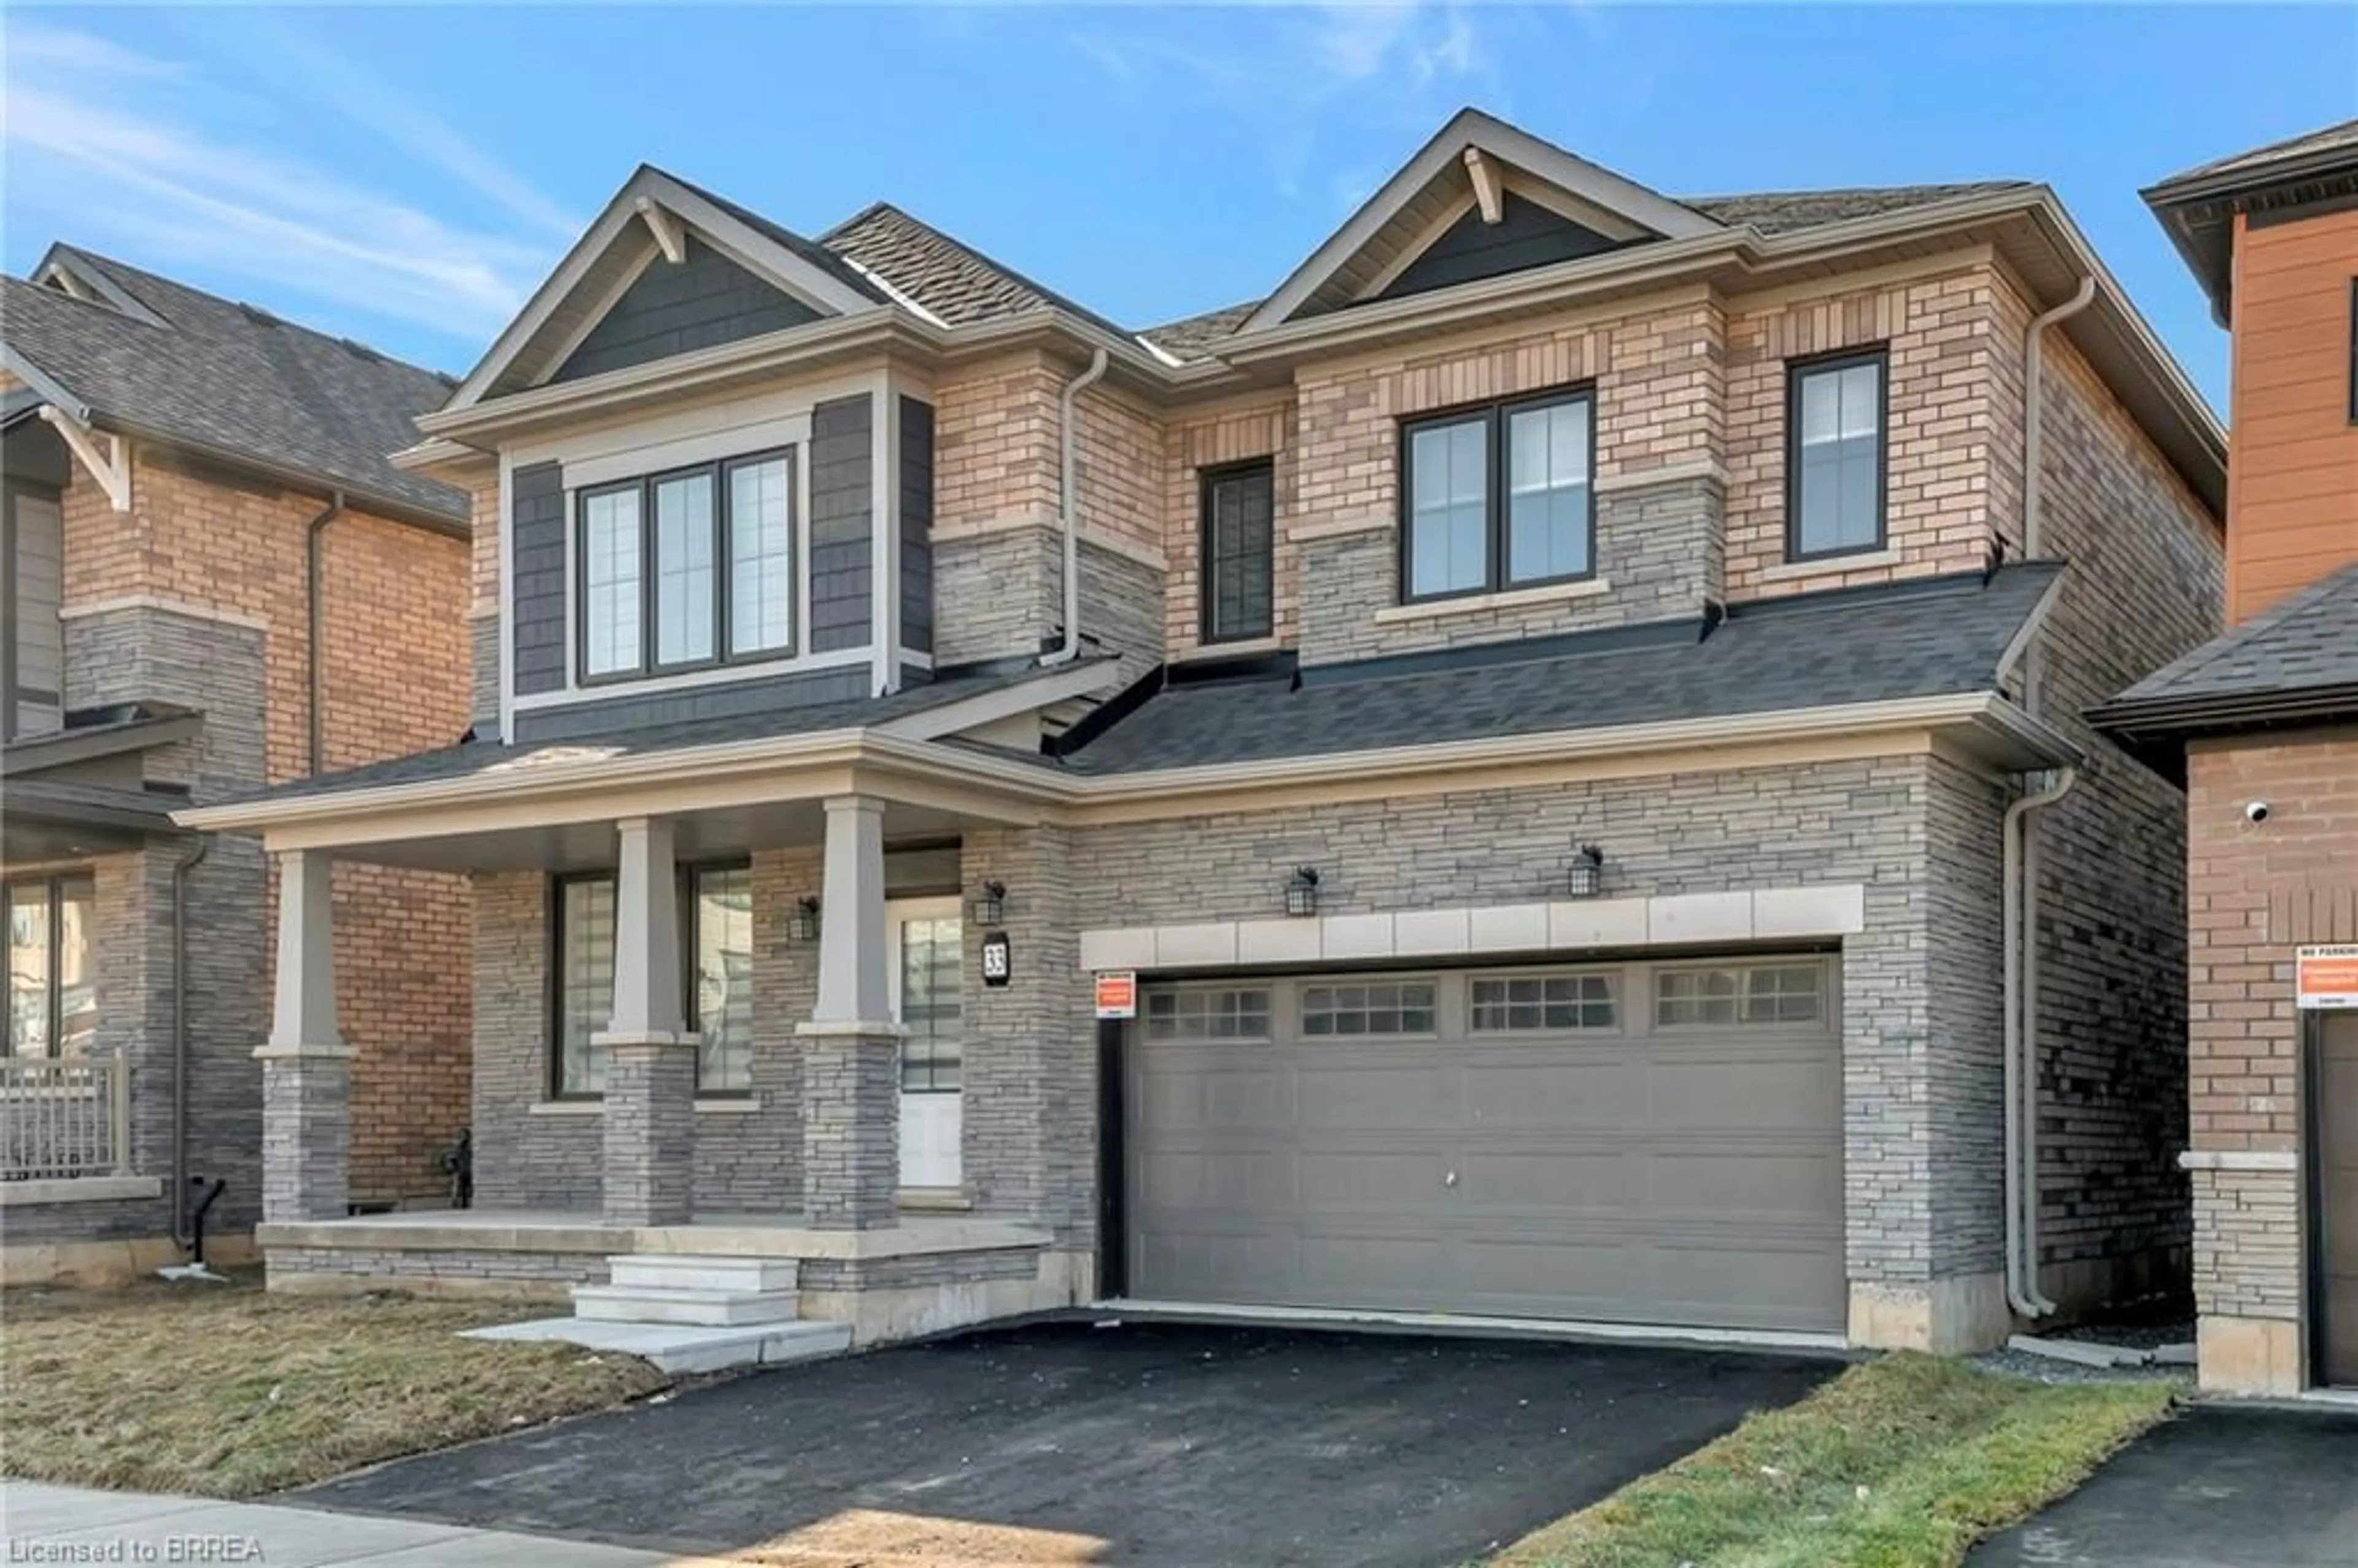 Home with brick exterior material for 33 Bee Cres, Brantford Ontario N3T 0V7